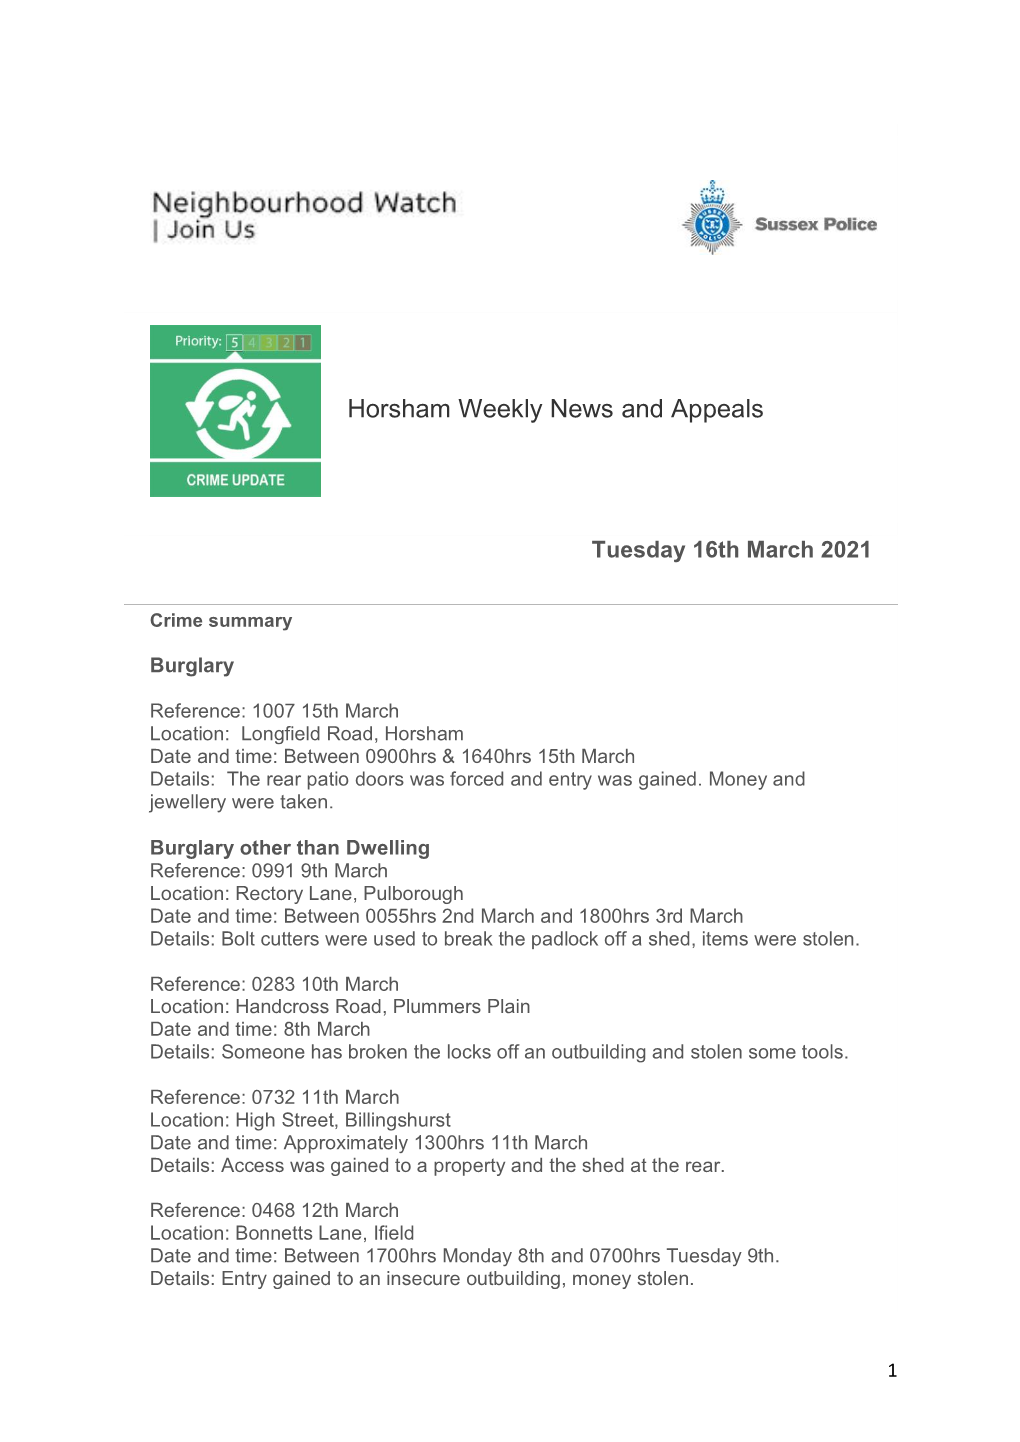 Horsham Weekly News and Appeals